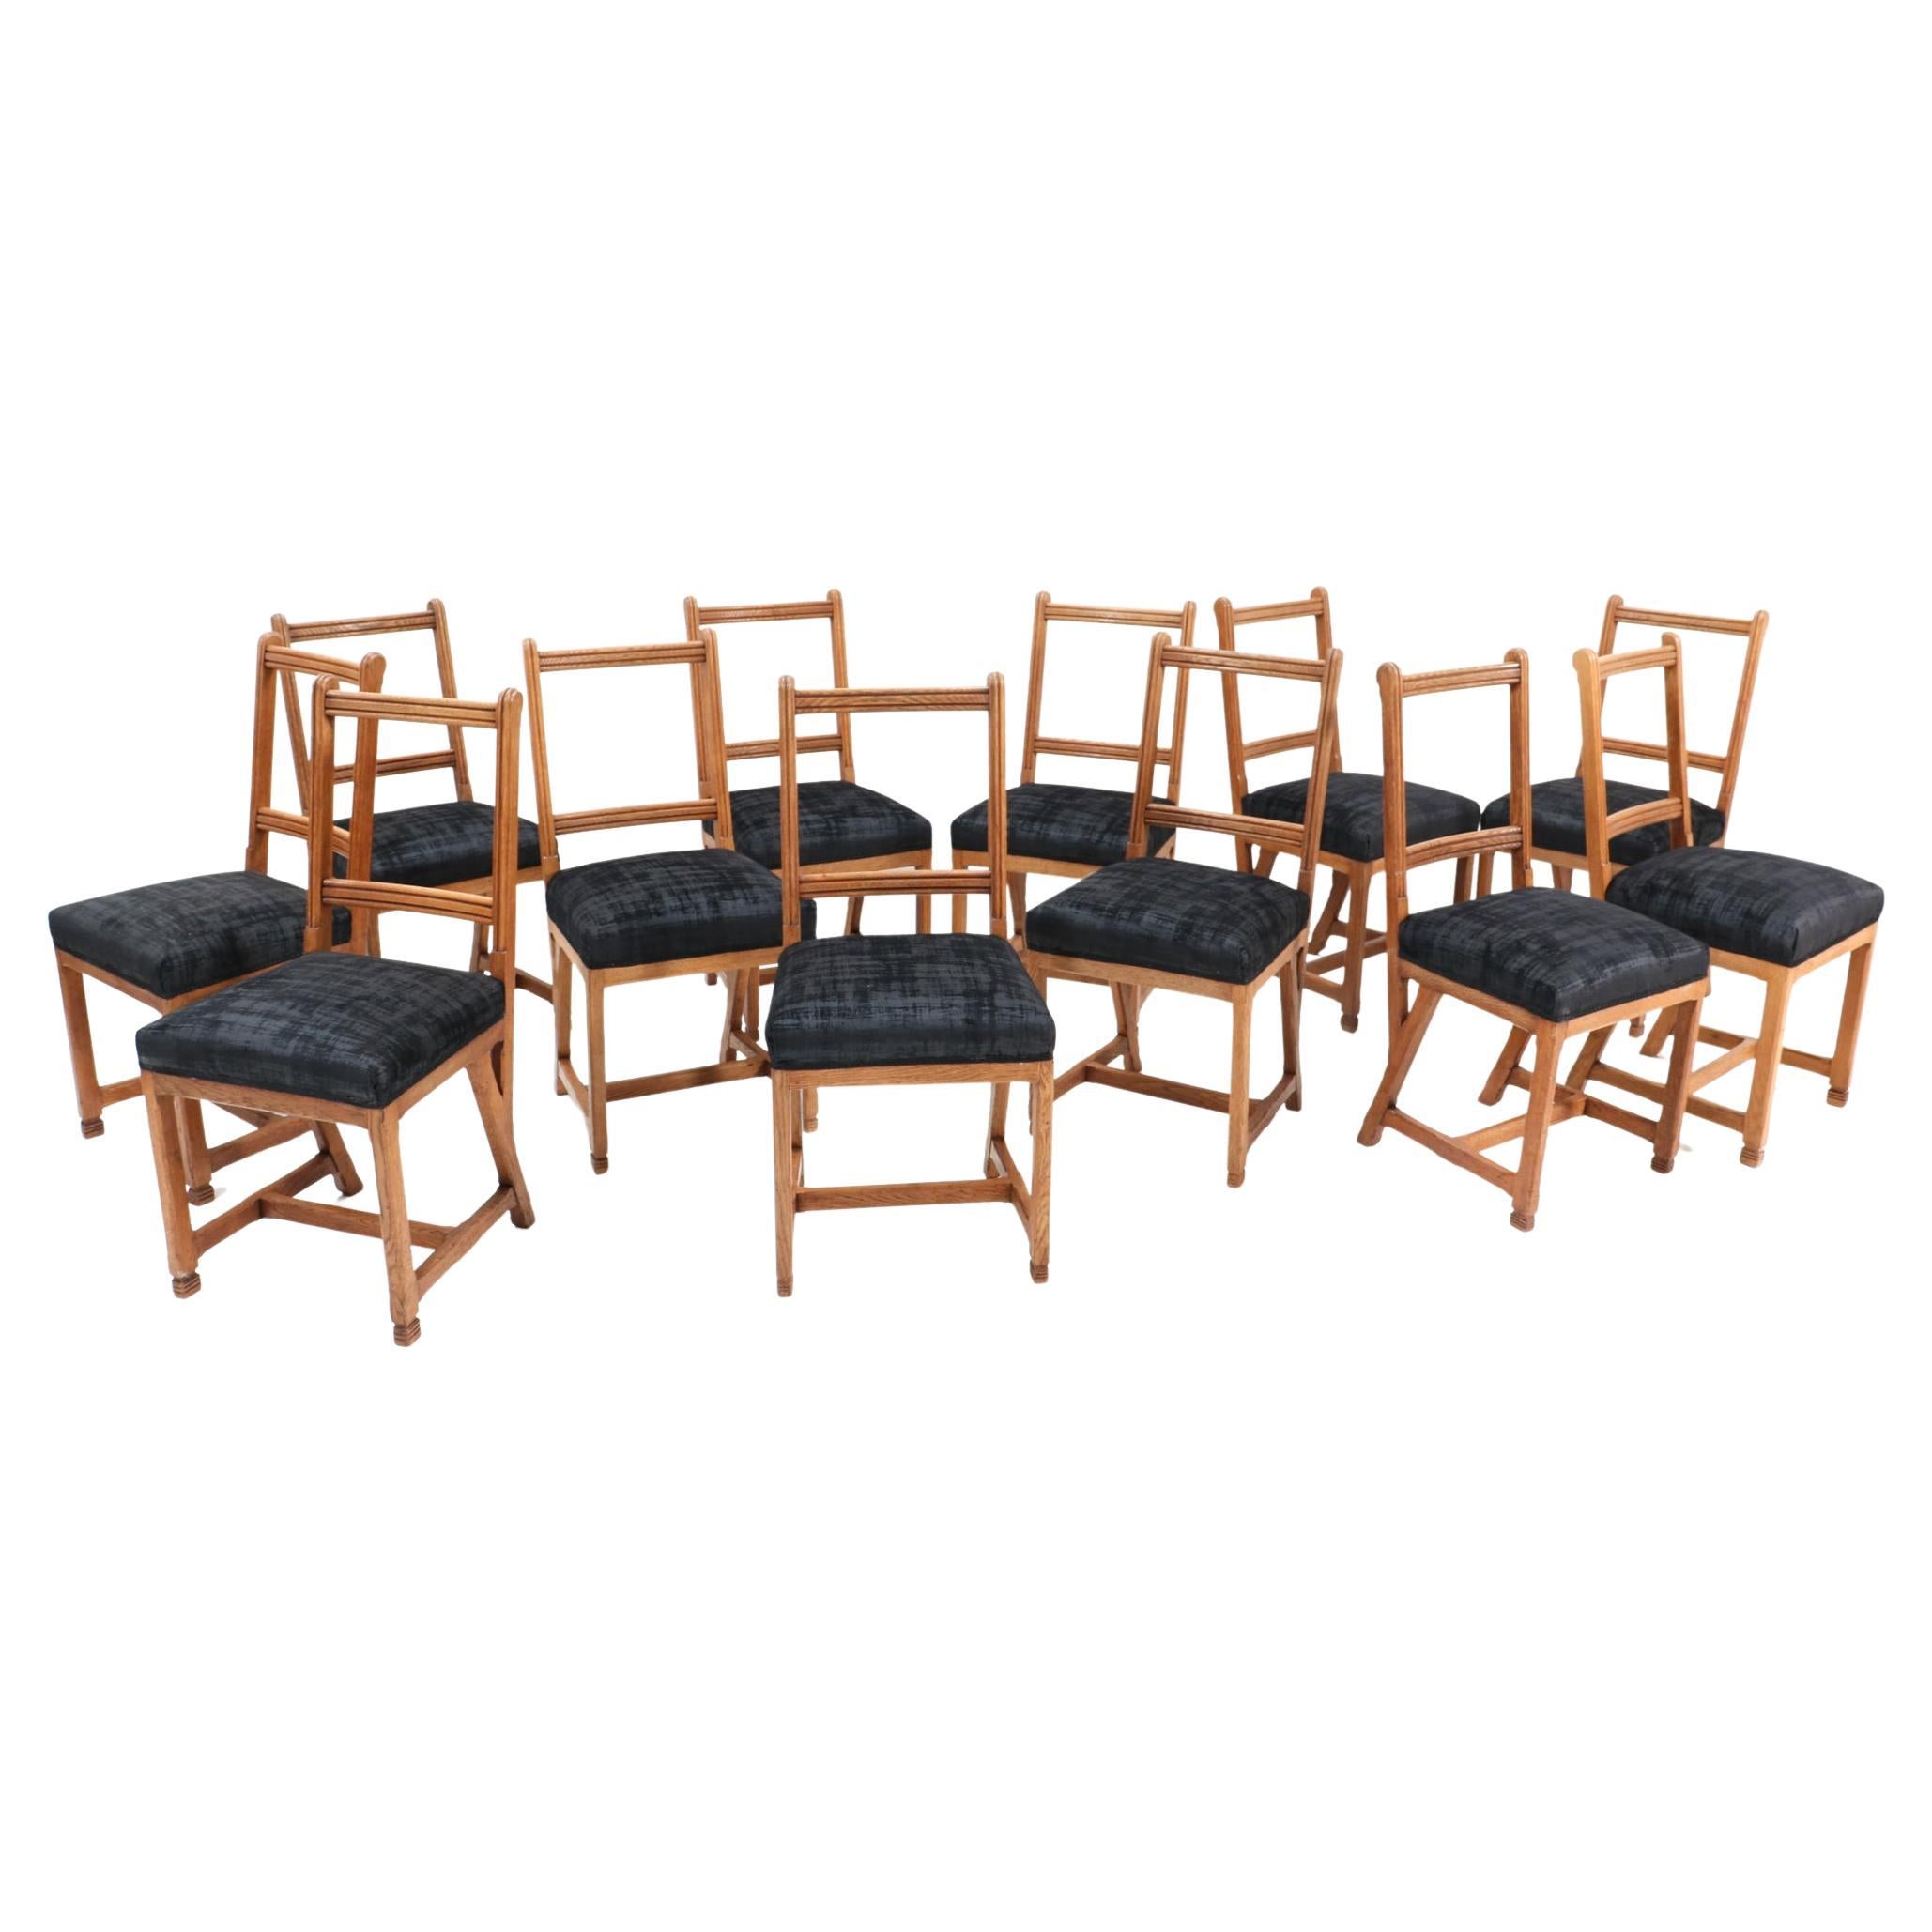 Twelve Oak Arts & Crafts Chairs by Hendrik Petrus for the University of Leiden For Sale